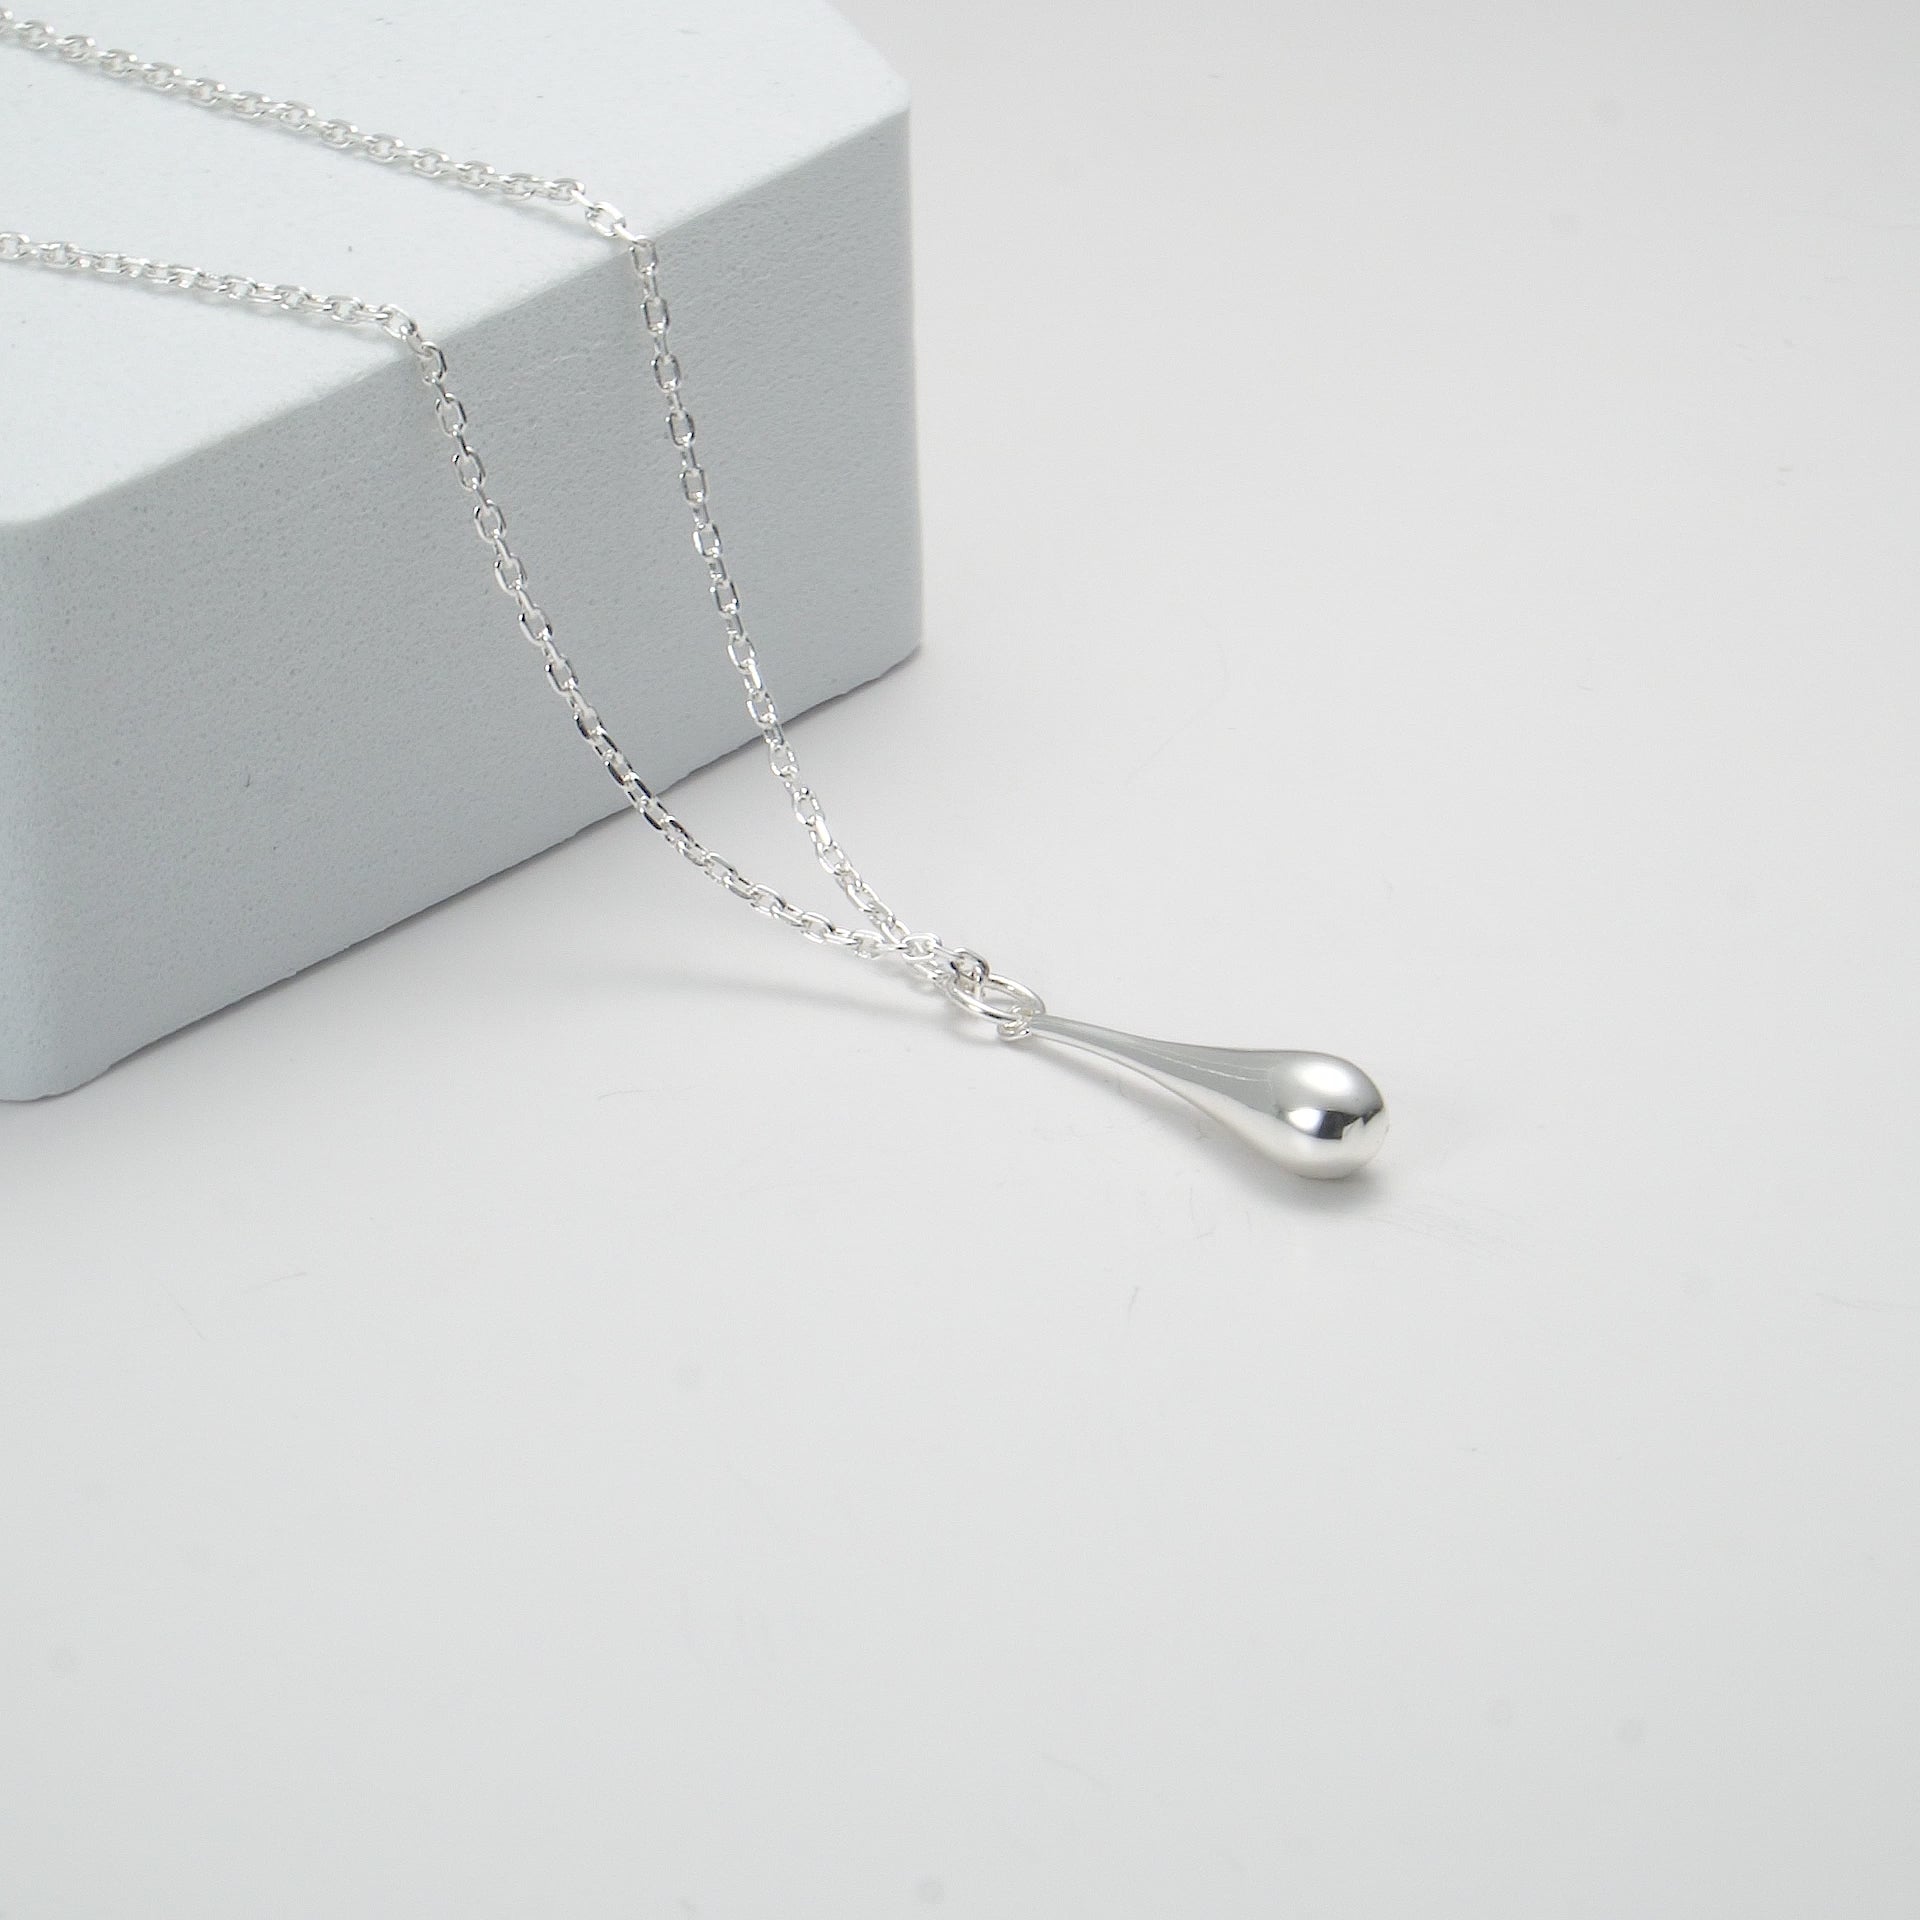 Silver Plated Teardrop Necklace Video